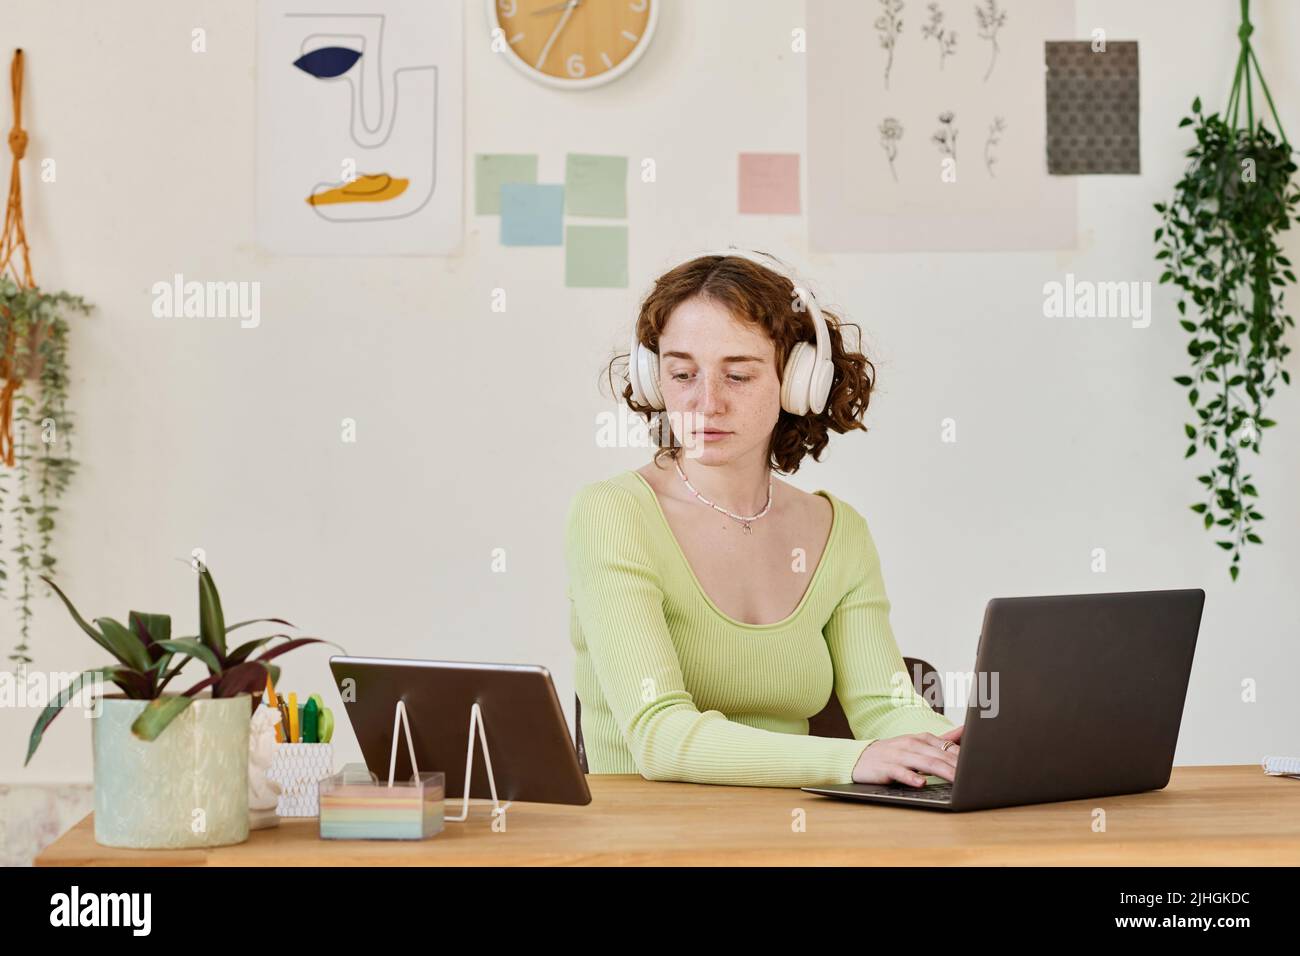 Young serious businesswoman or student in headphones networking by desk while sitting in front of laptop, typing and looking at tablet screen Stock Photo